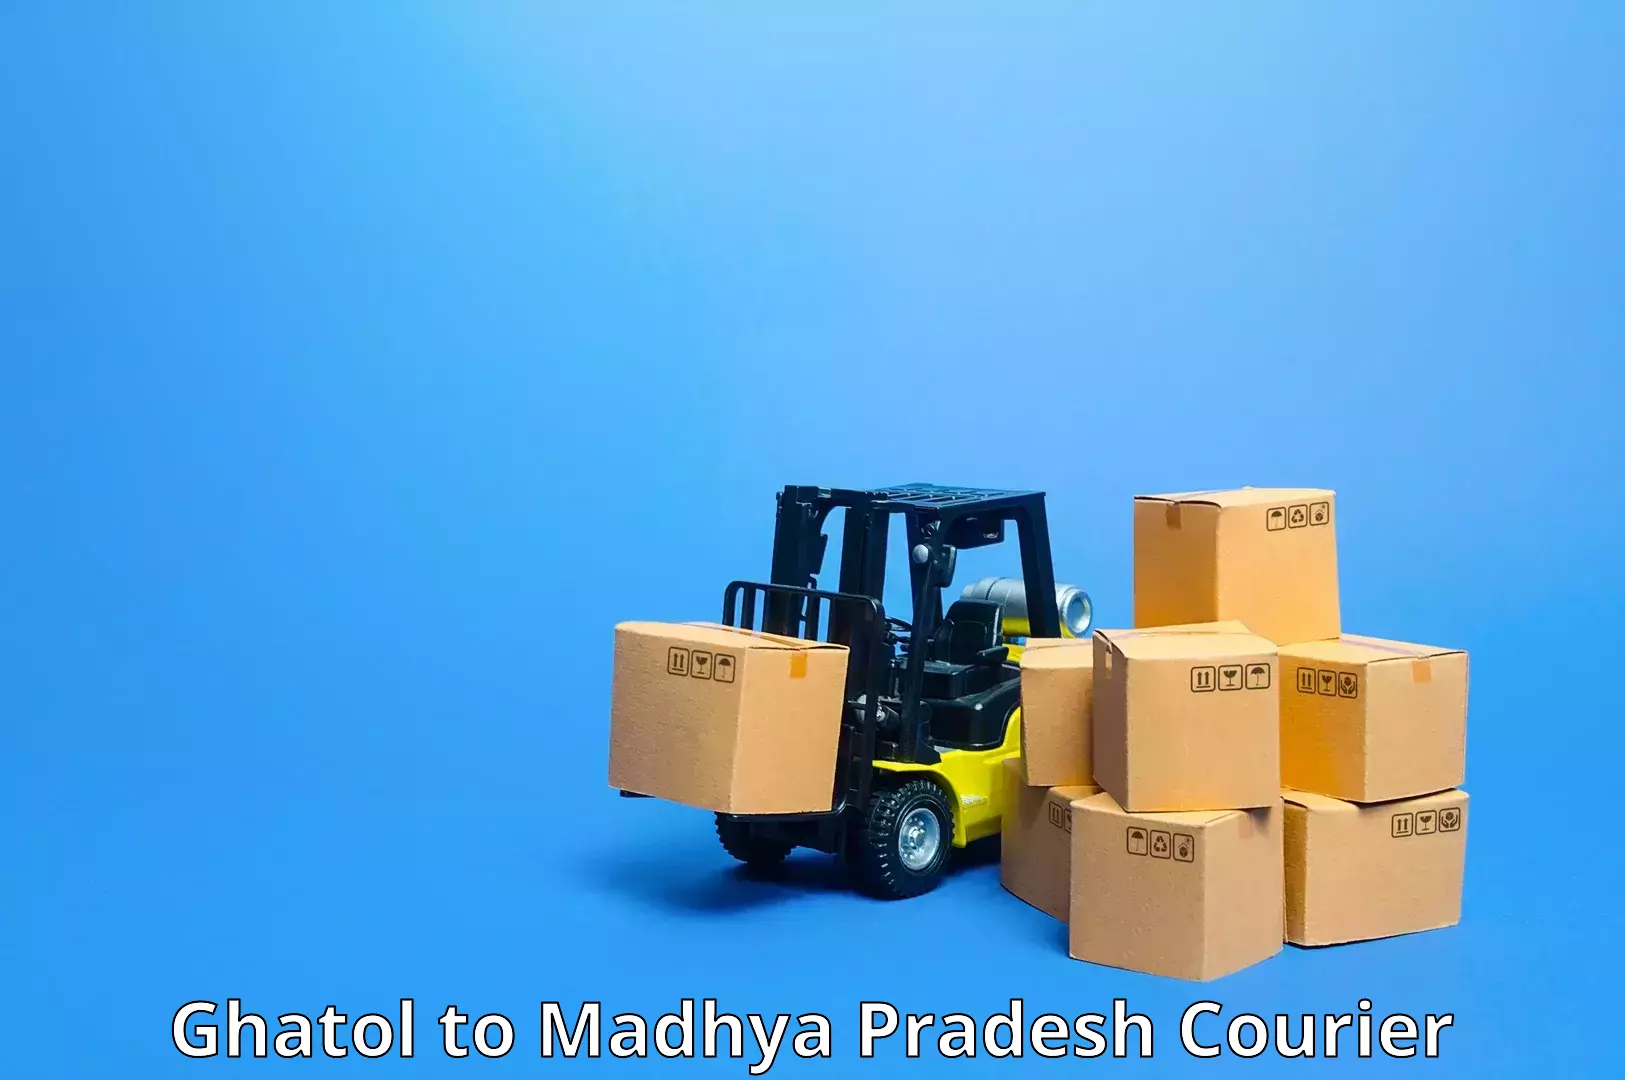 Reliable courier service Ghatol to Madhya Pradesh